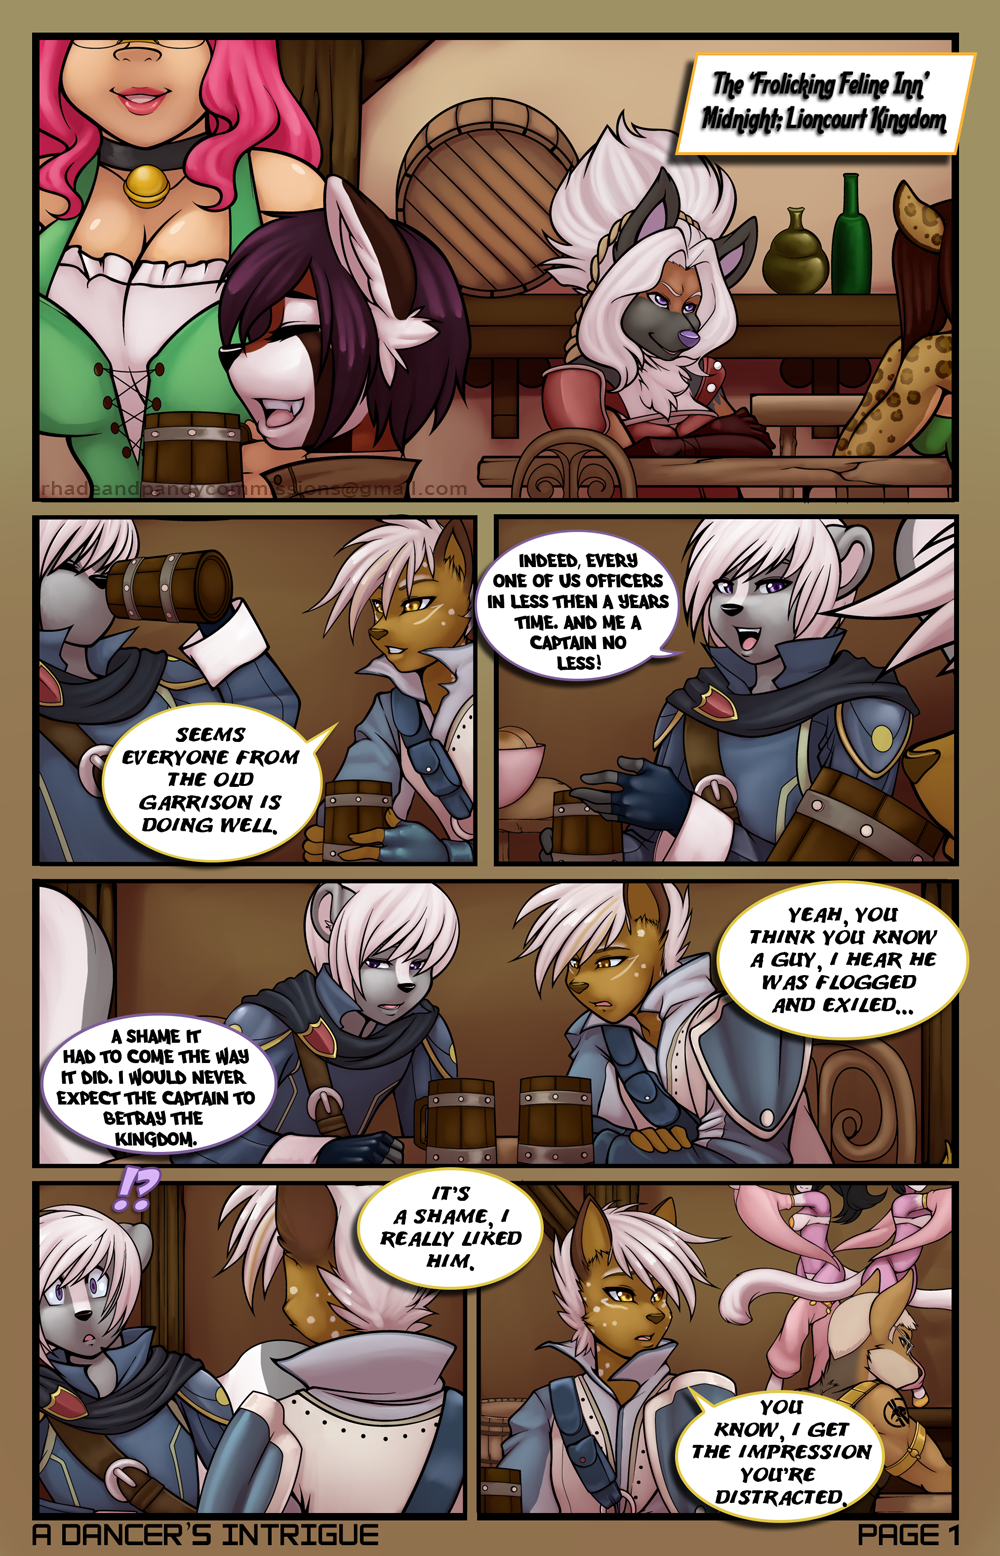 A Dancer's Intrigue Page 1